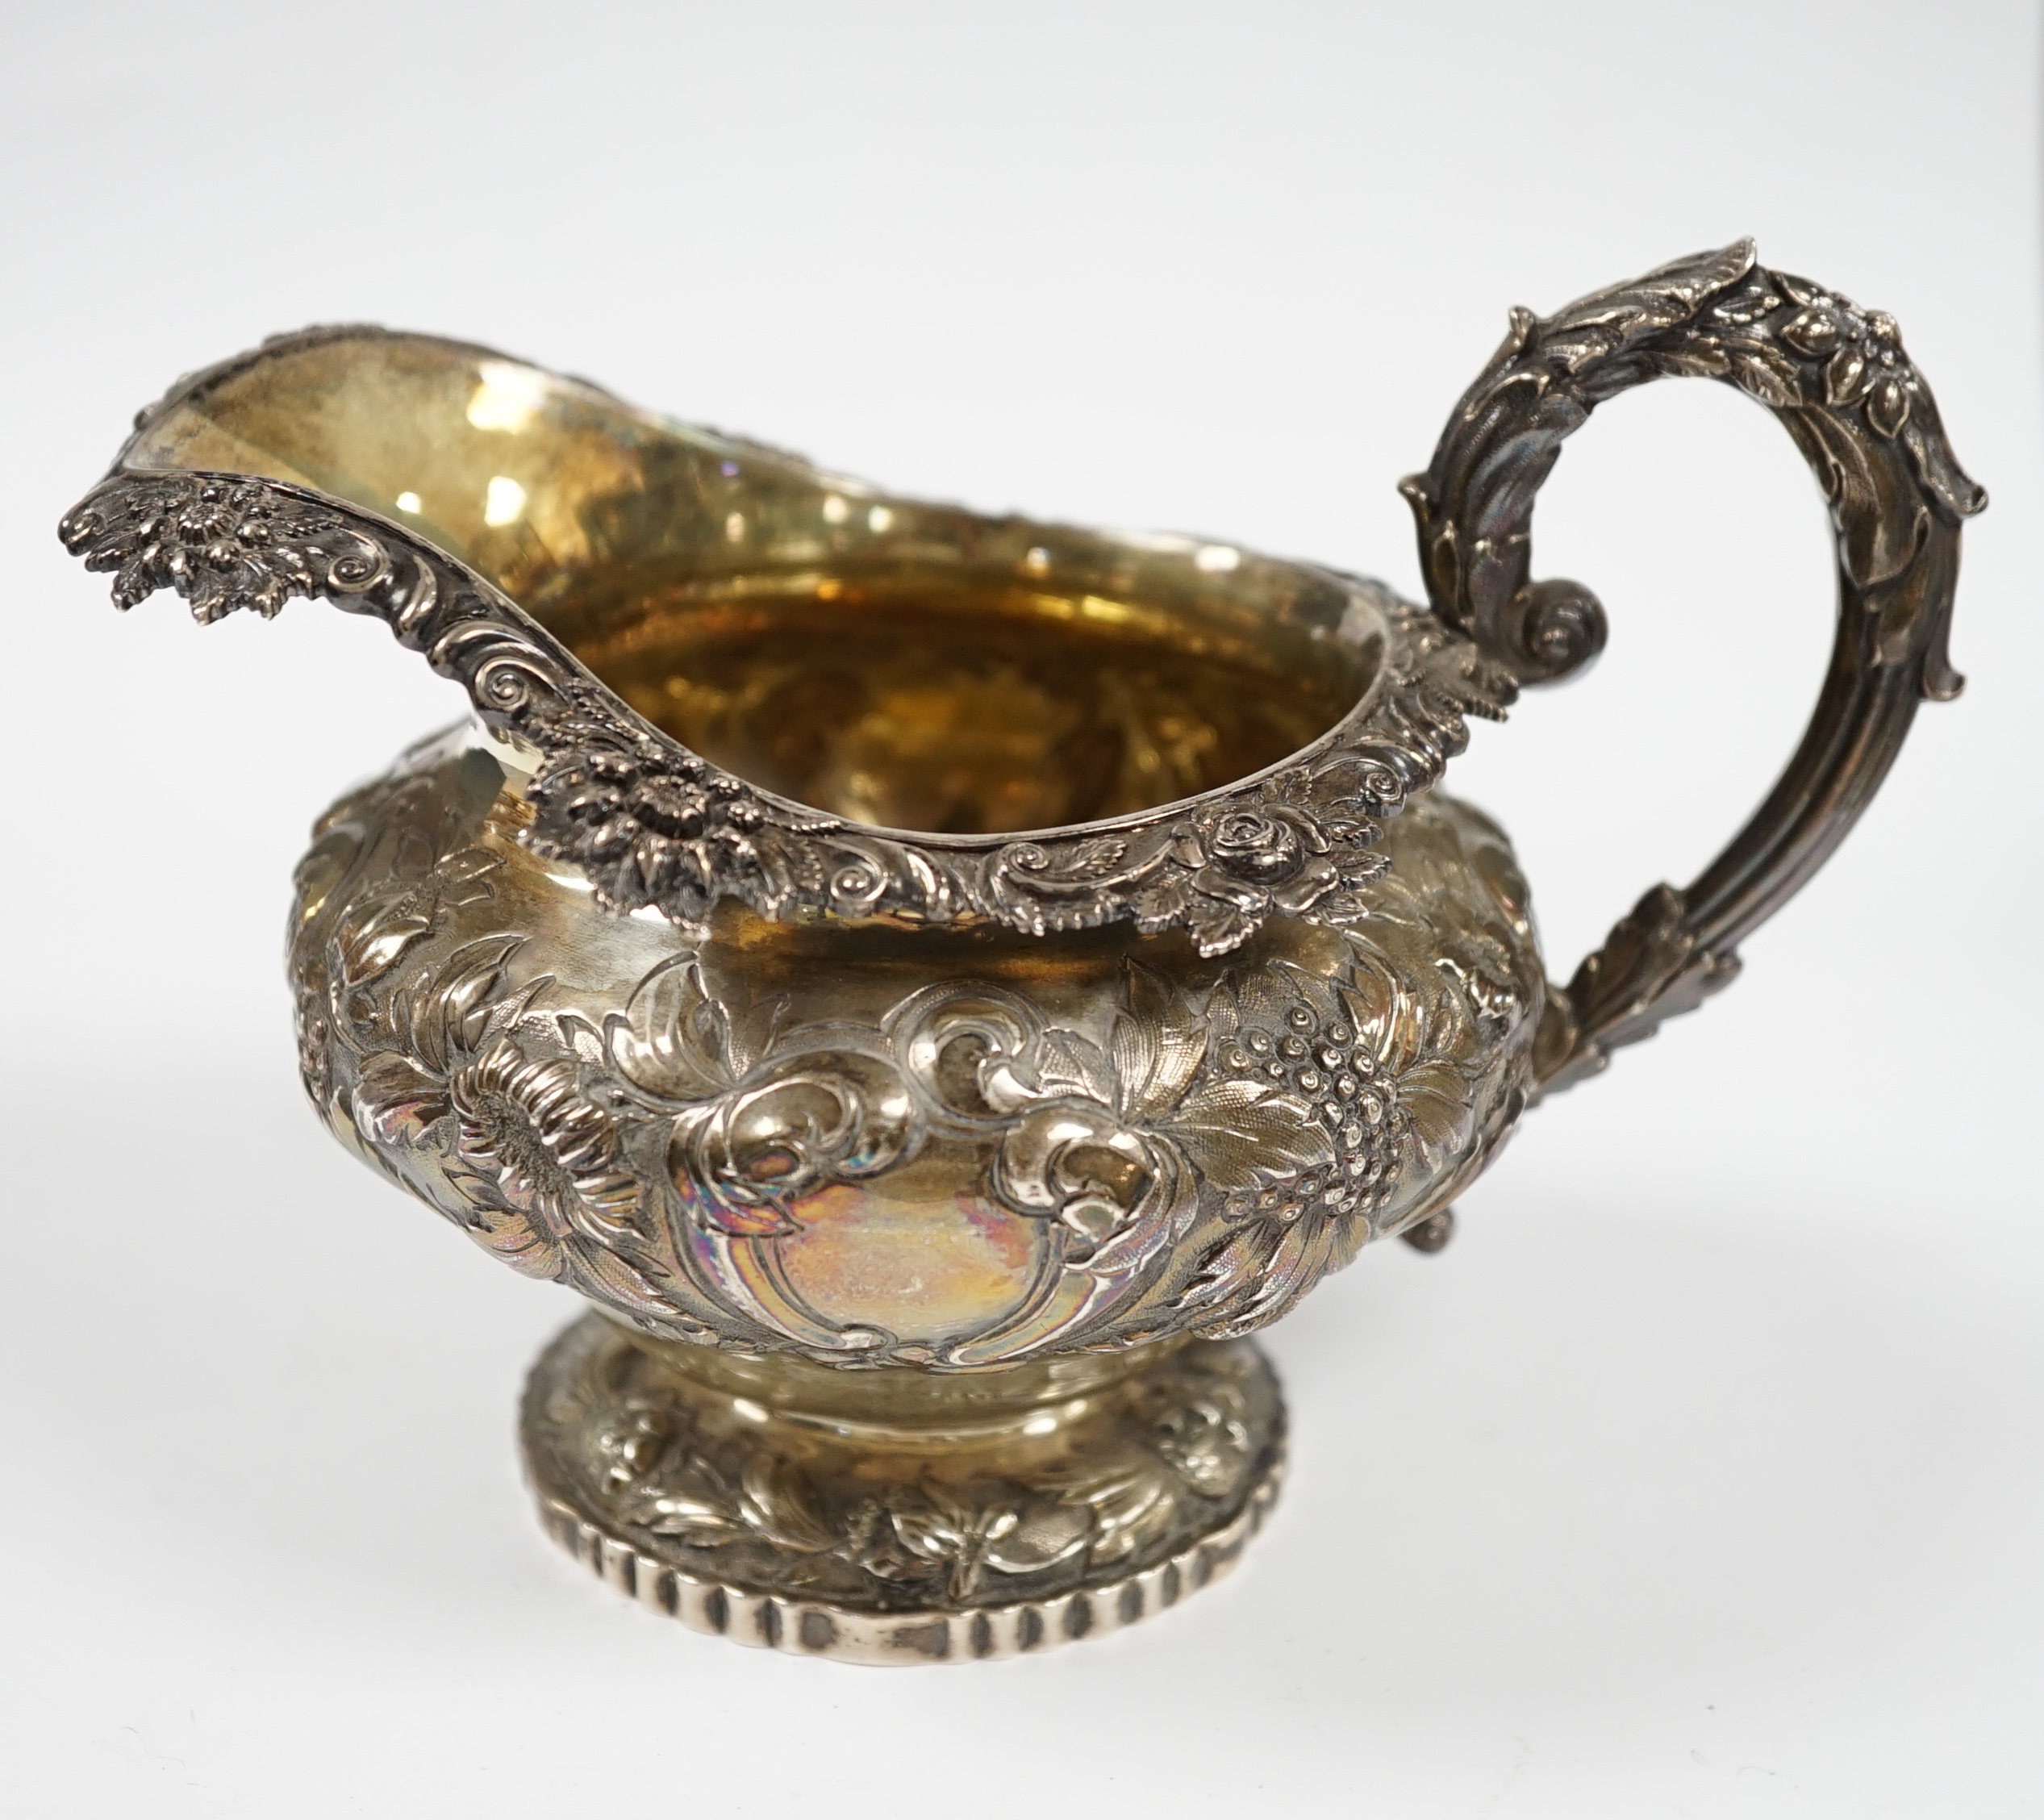 A George IV embossed silver milk jug, by Charles Fox, London, 1826, 11.5cm, 9.3oz. Condition - fair to good